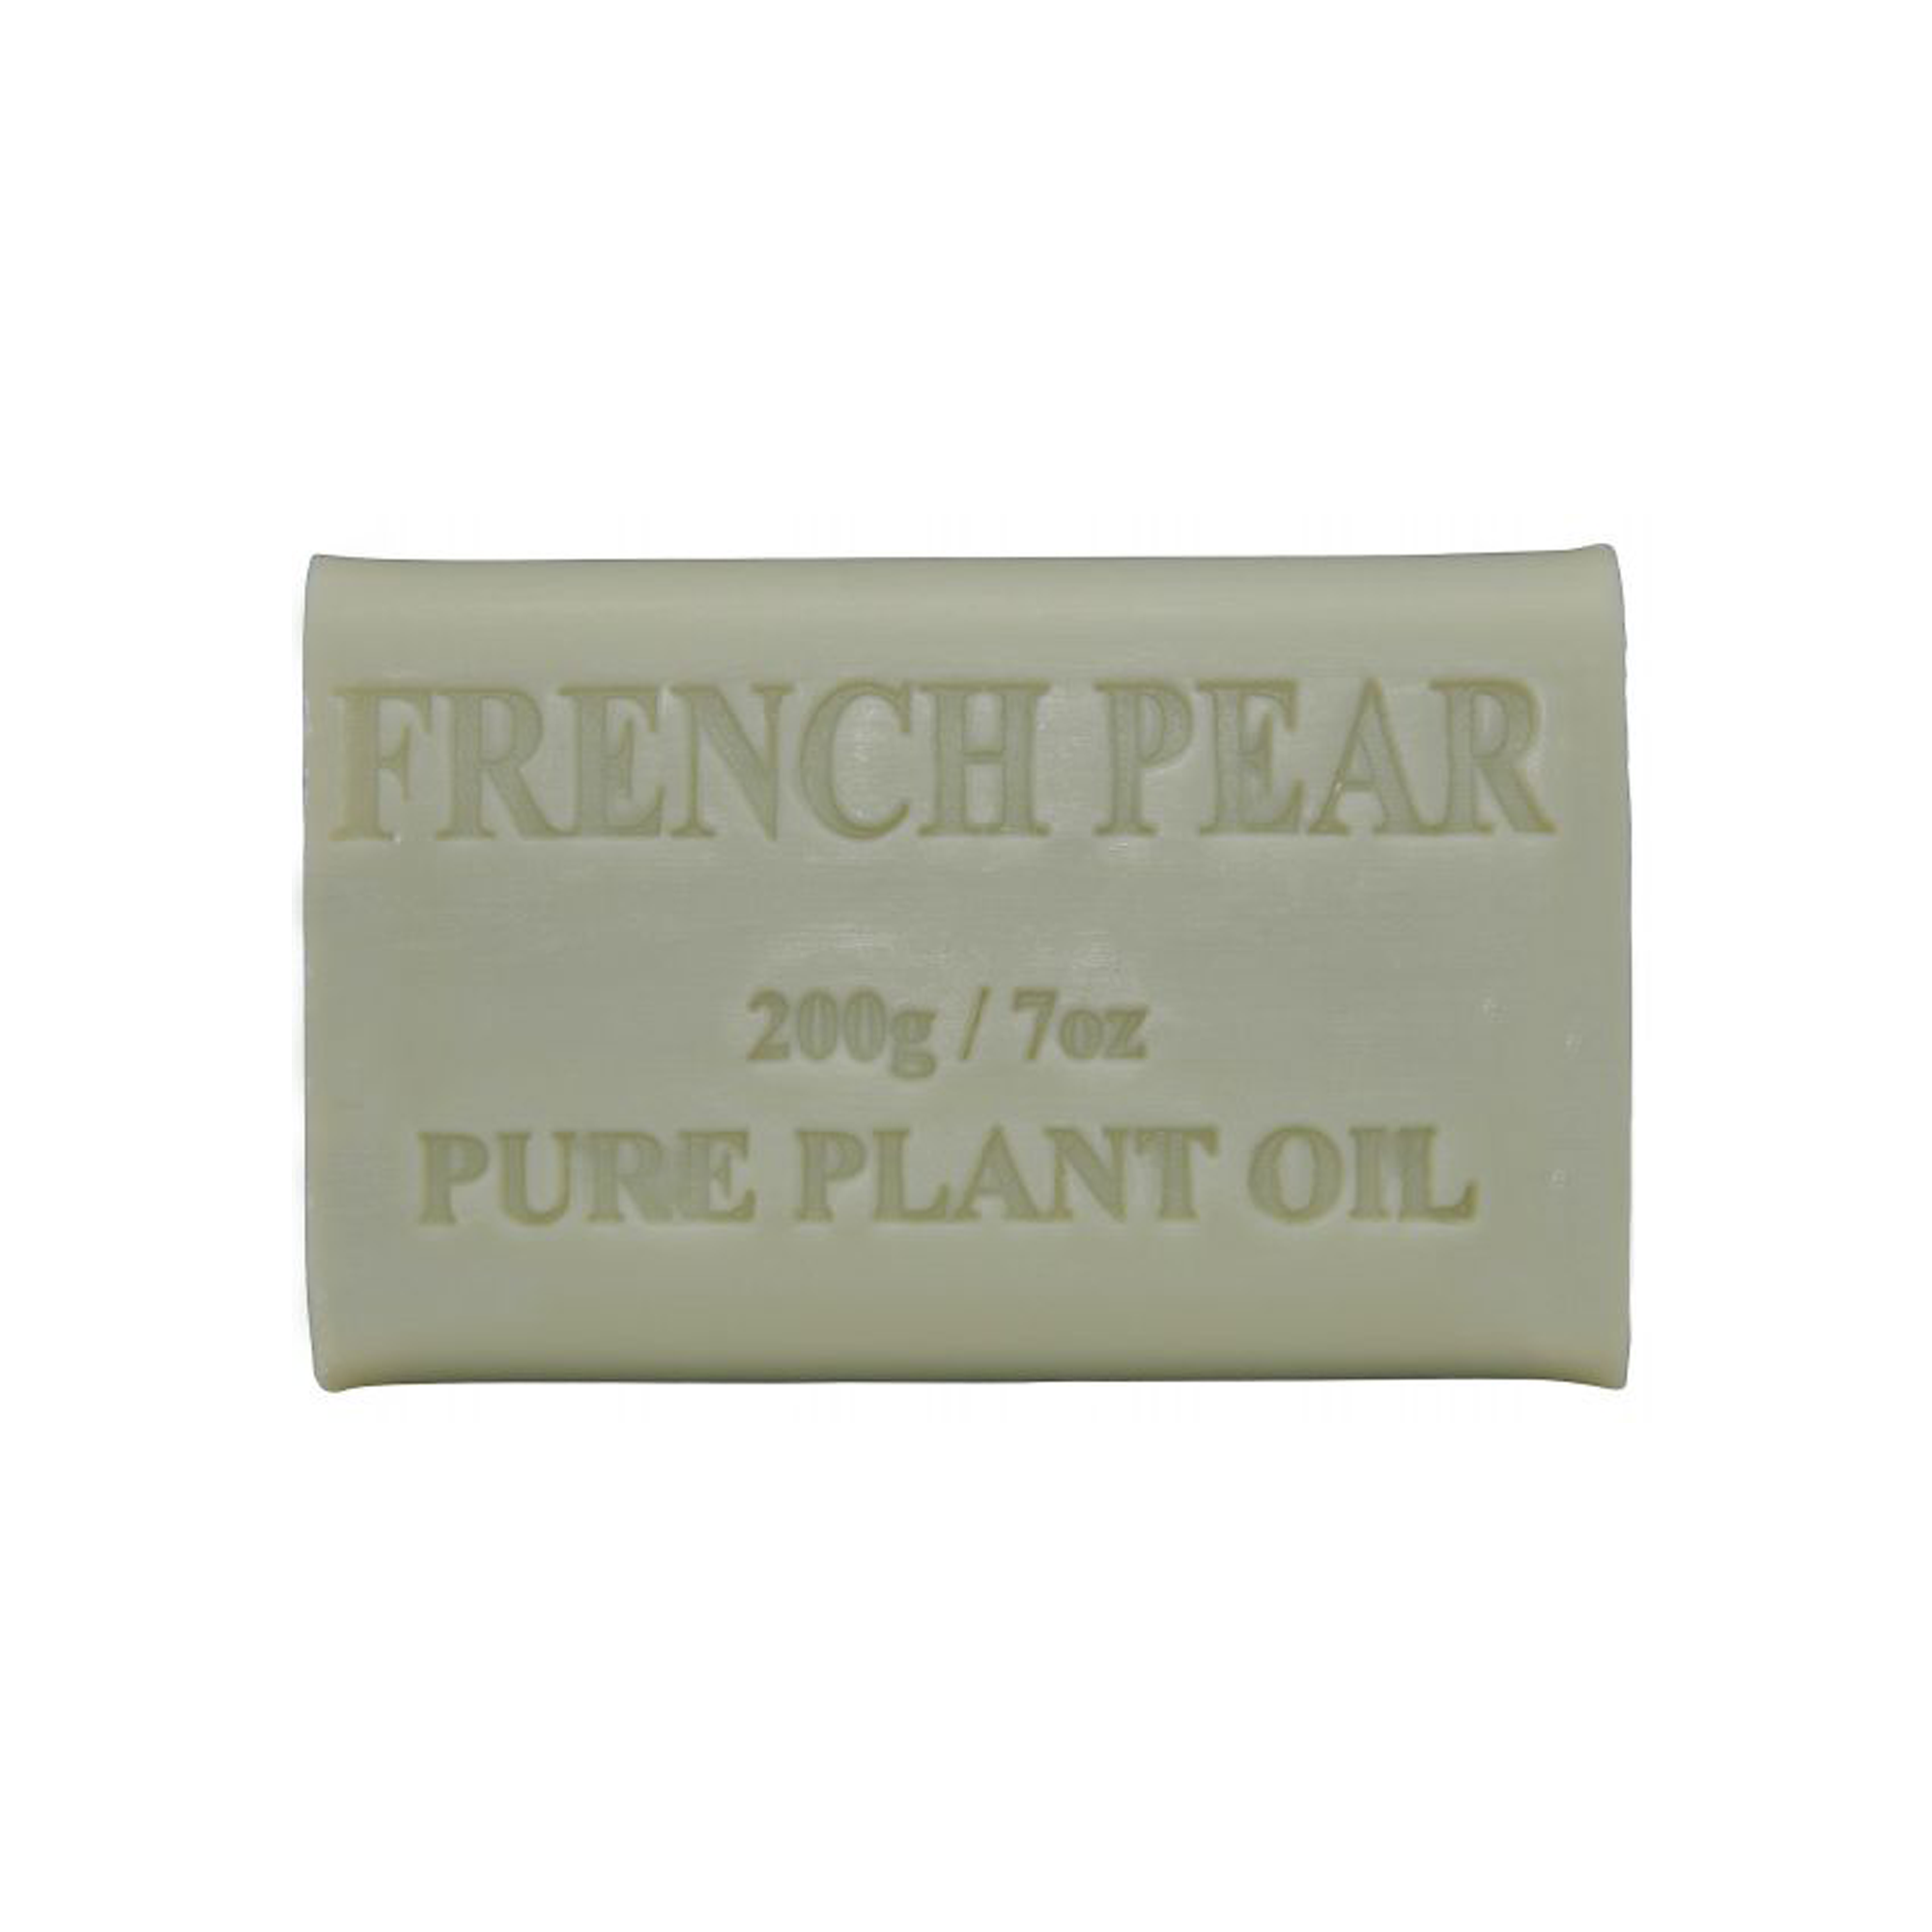 French Pear 200g